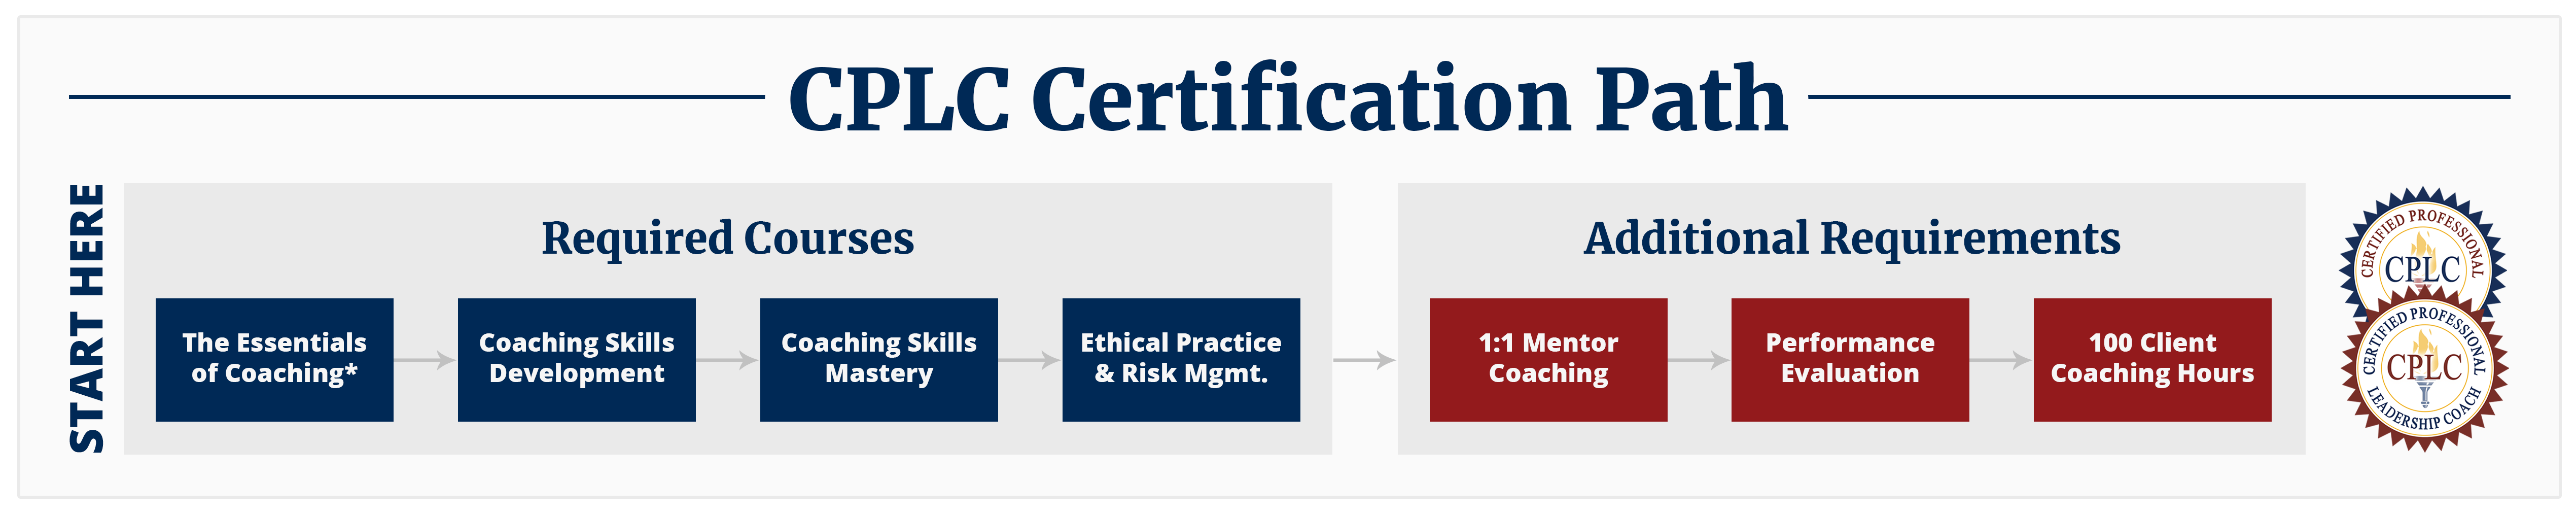 CPLC Certification Path